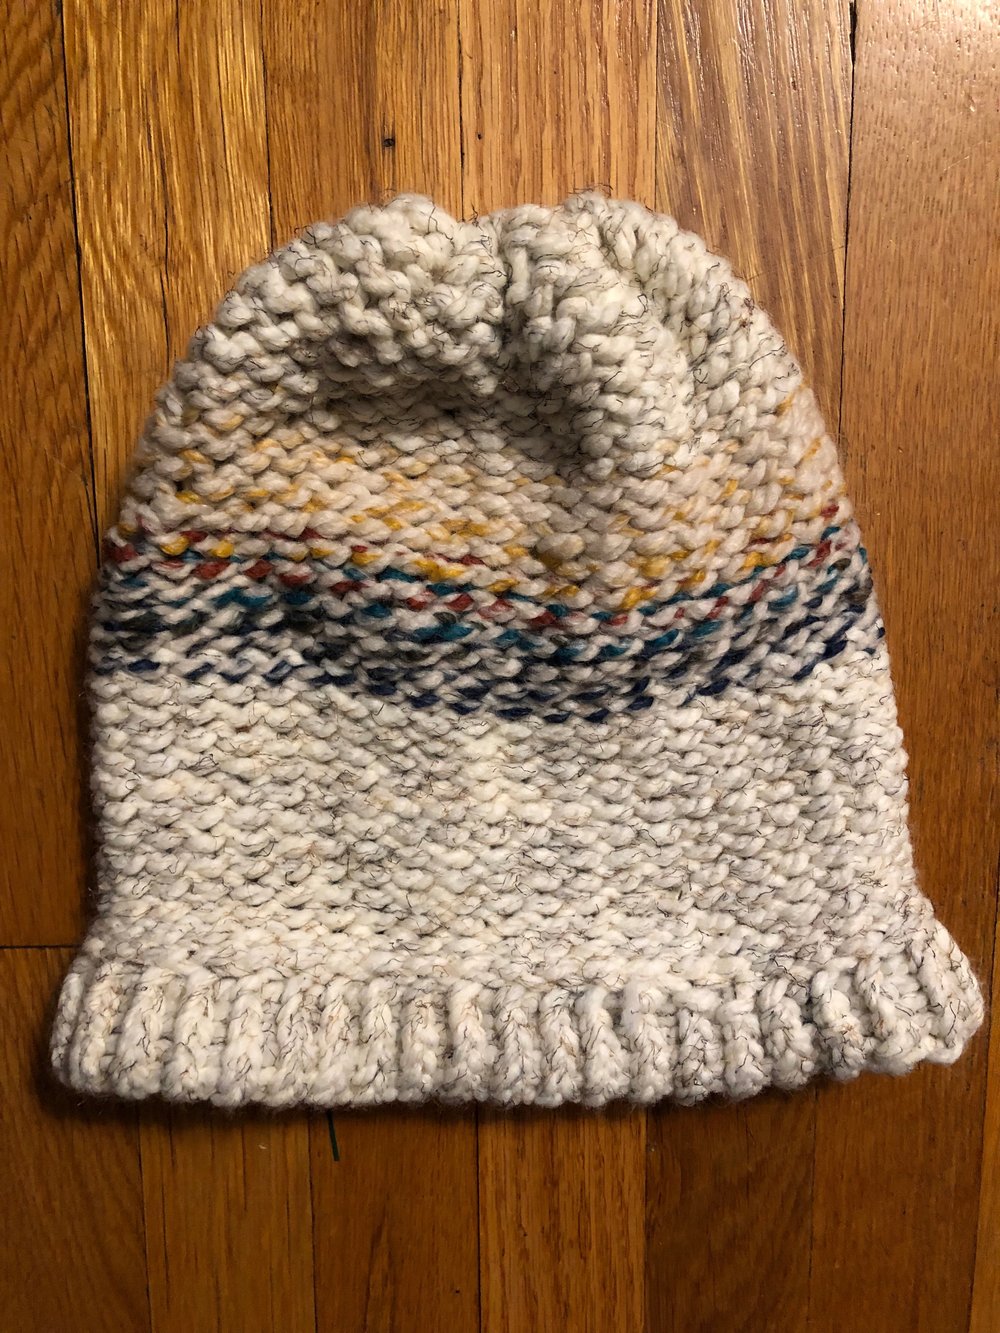 “Lorelei” Hand-knitted slouchy hat